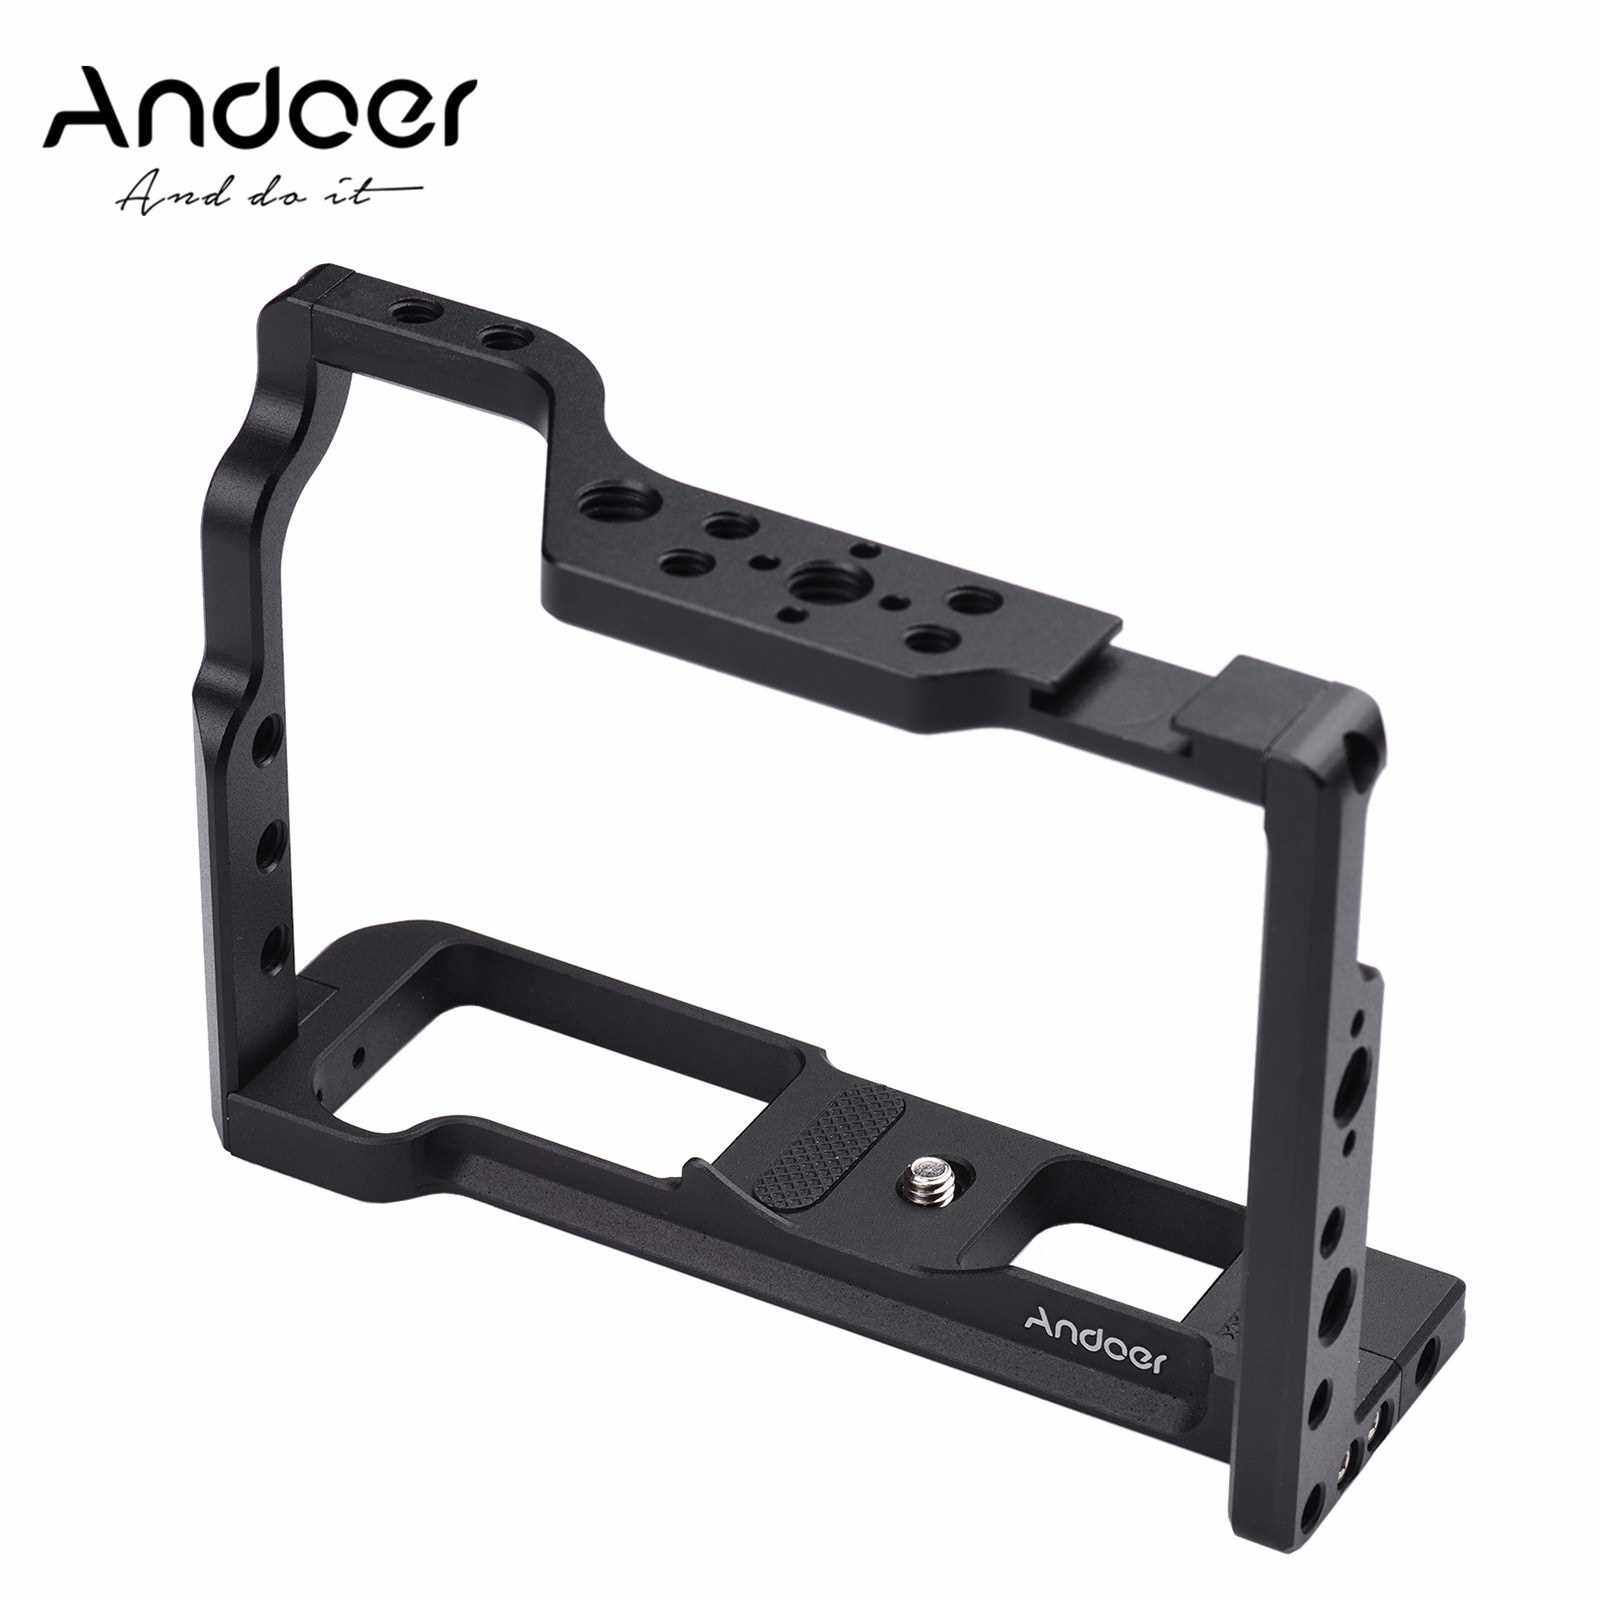 Andoer Aluminum Alloy Camera Cage Protective Vlog Cage Film Making System with Cold Shoe for Microphone Fill Light Compatible with Fujifilm X-T3 X-T2 ILDC Camera (Standard)